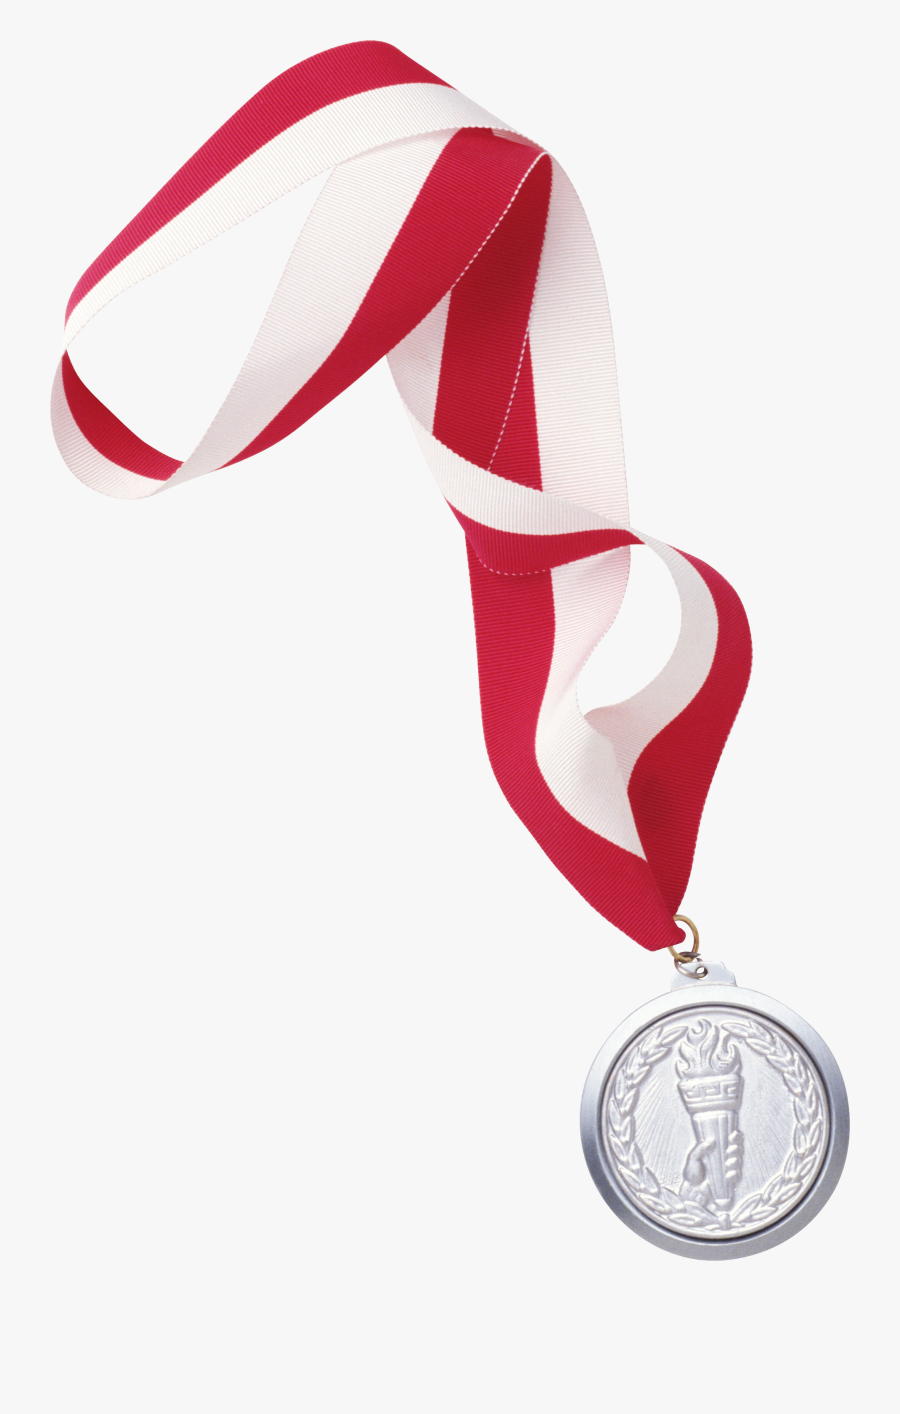 Download This High Resolution Medal Transparent Png, Transparent Clipart